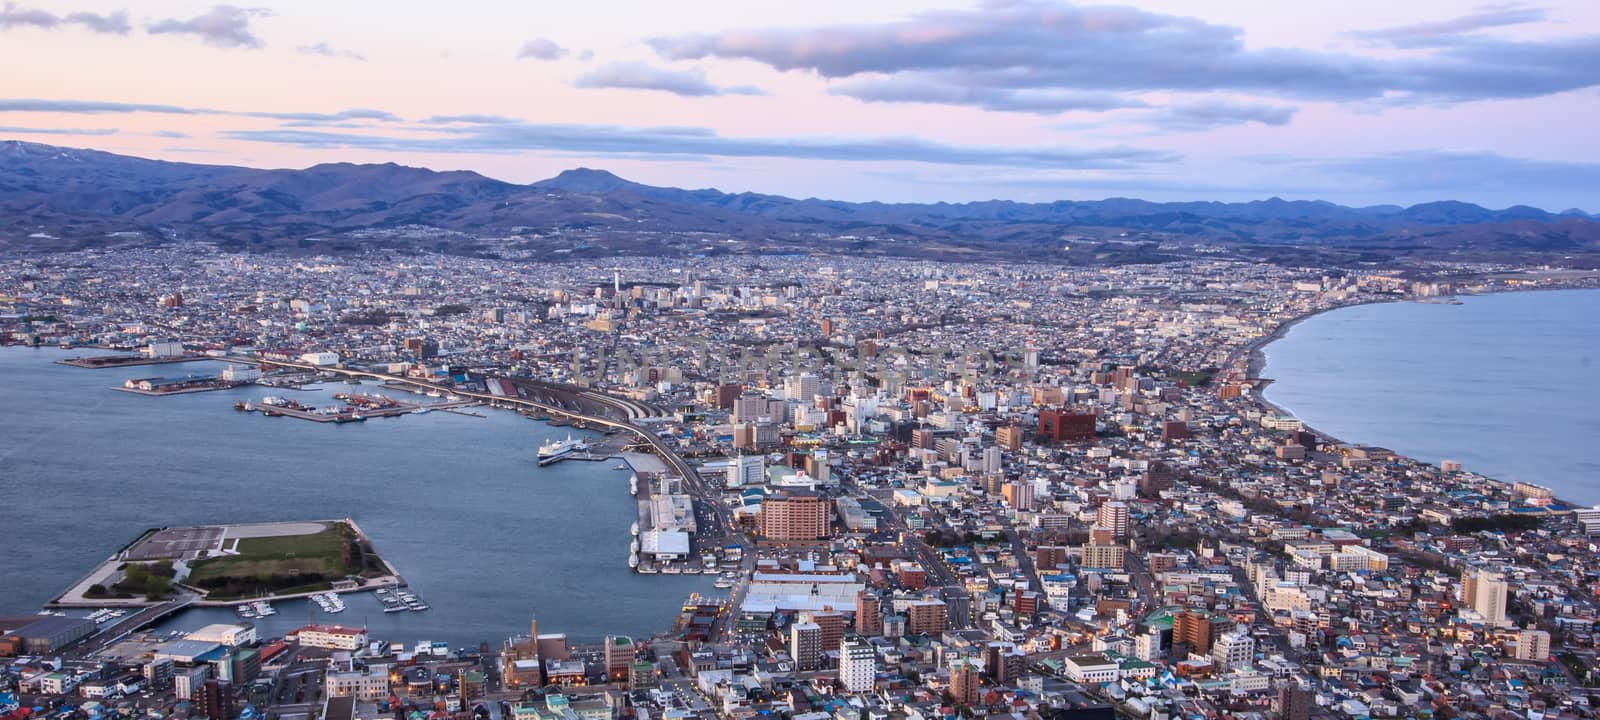 Beautiful Sunset View from Mt Hakodate, Hakodate city with bay and harbour on the peninsula with sea on both sides. Hakodate, Hokkaido, Japan. by victorflowerfly